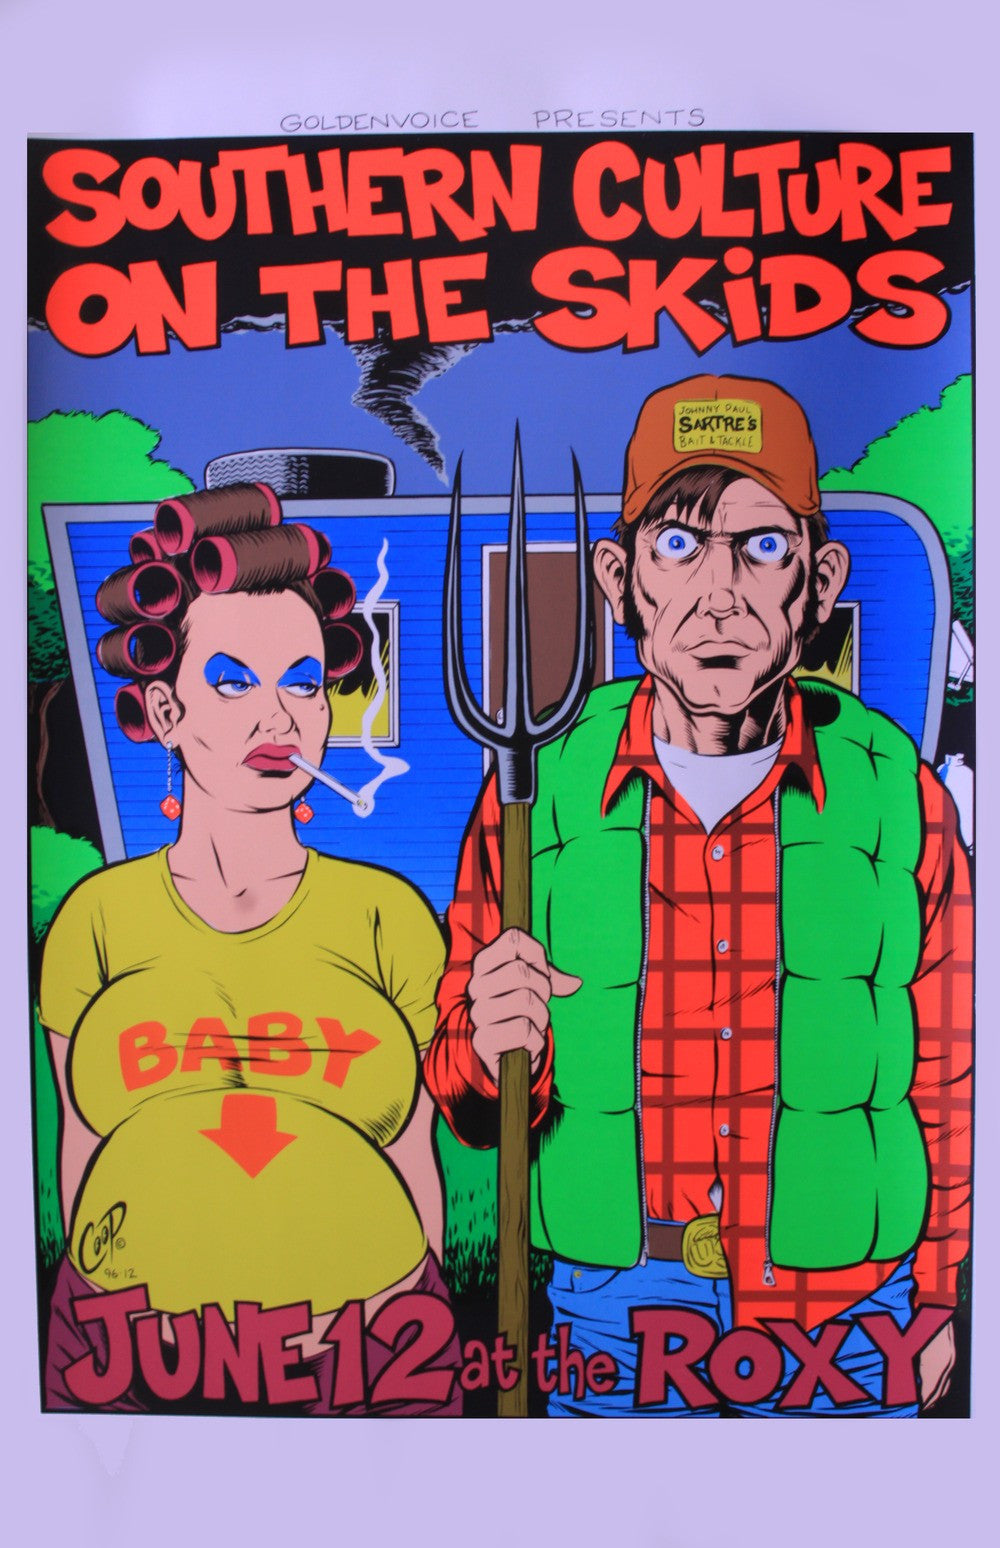 Coop - 1996 - Southern Culture On the Skids Concert Poster